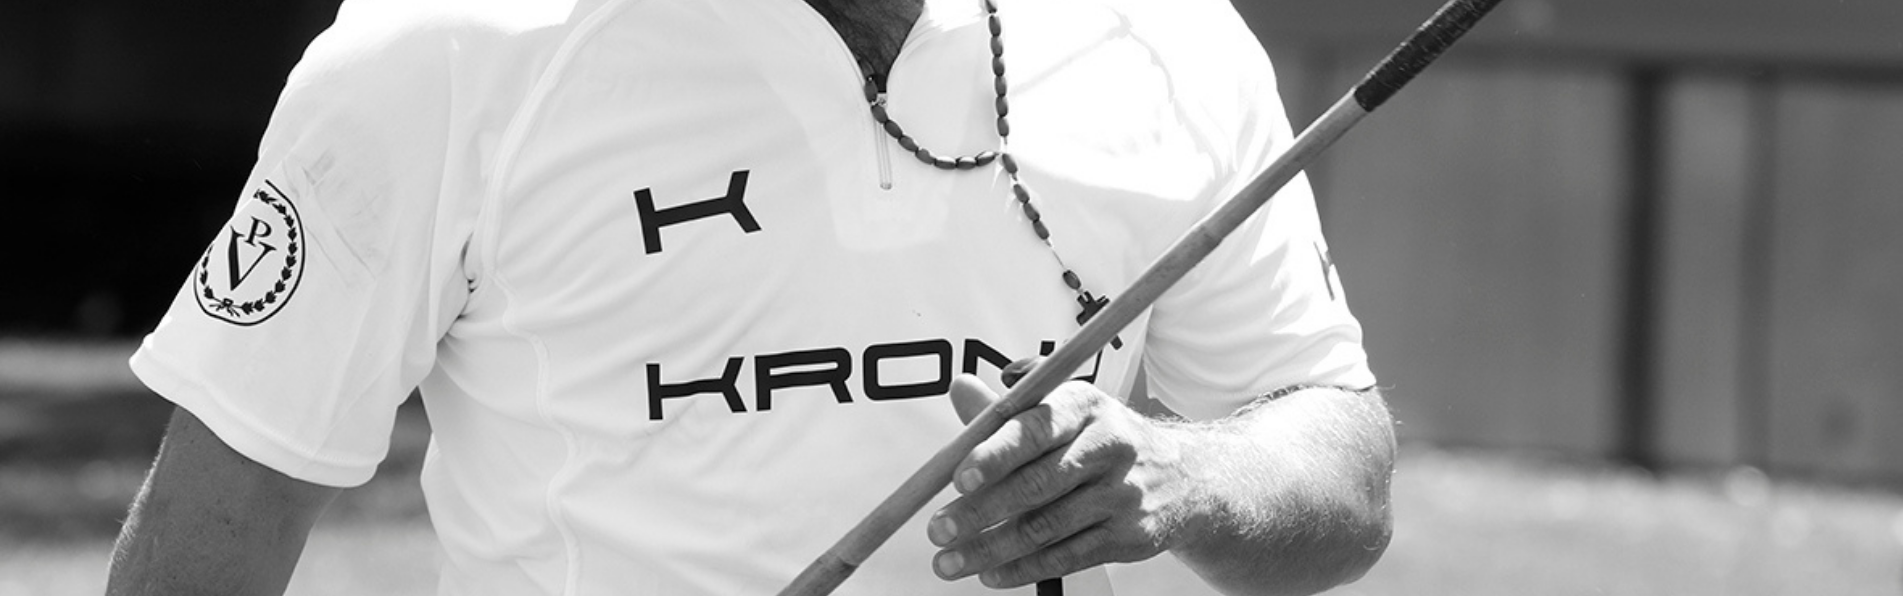 https://www.kronopolo.com/image/cache/catalog/blog/banner%202/polo%20team%20shirts-1903x596.png